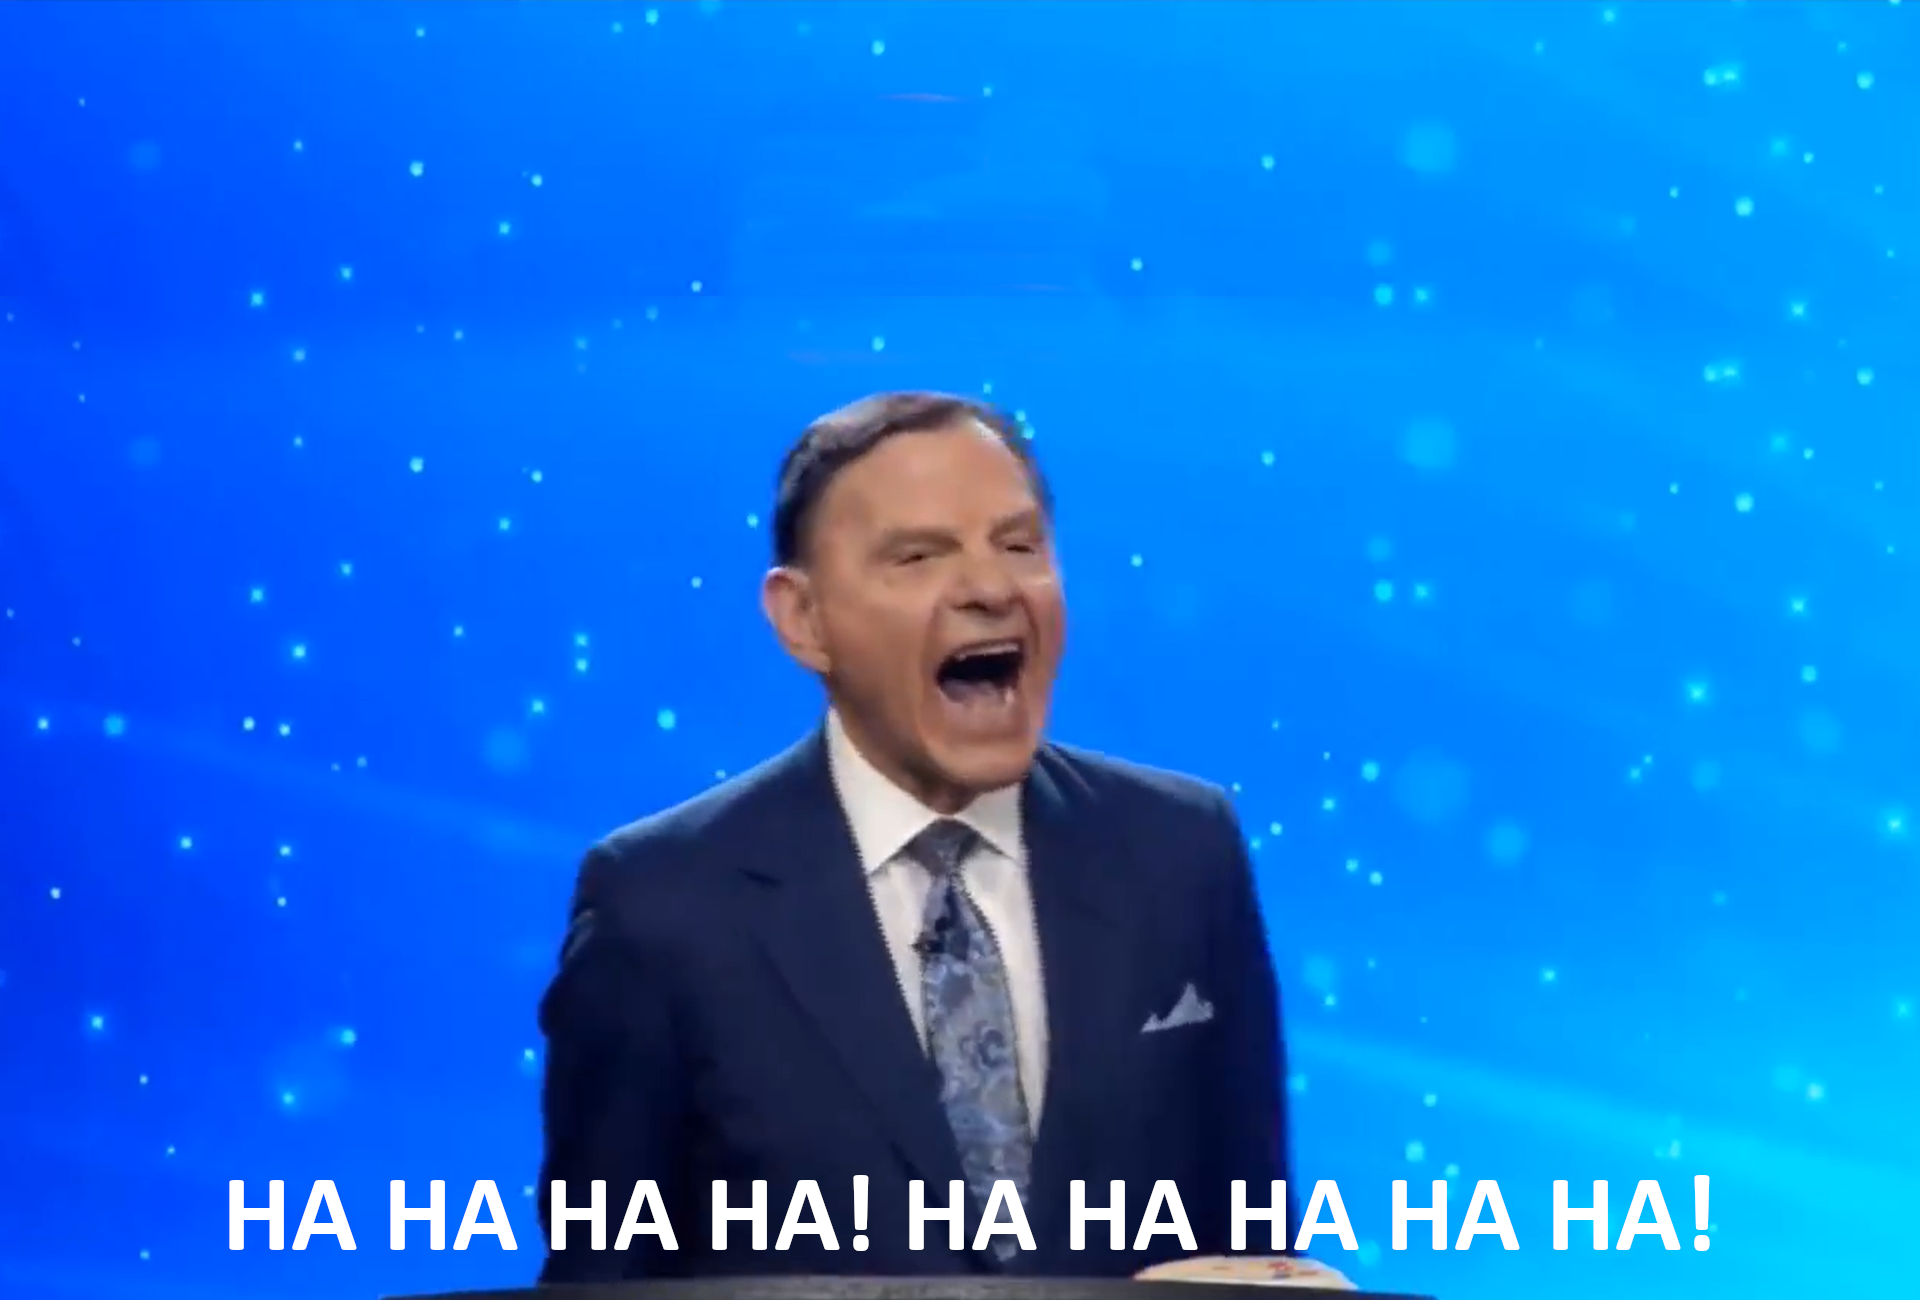 Kenneth Copeland Laughing Blank Meme Template